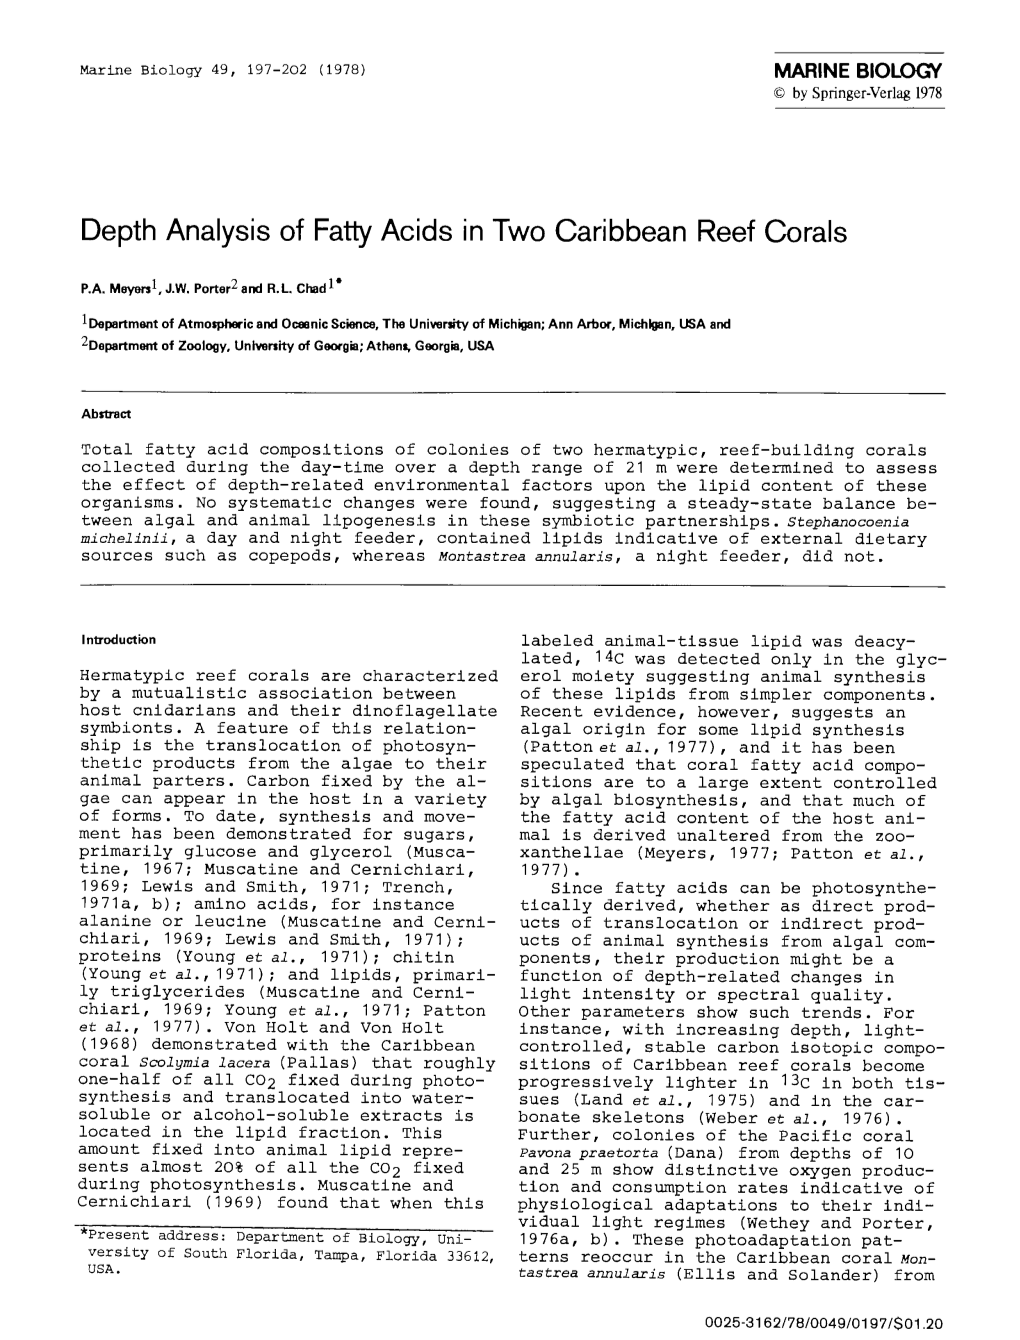 Depth Analysis of Fatty Acids in Two Caribbean Reef Corals